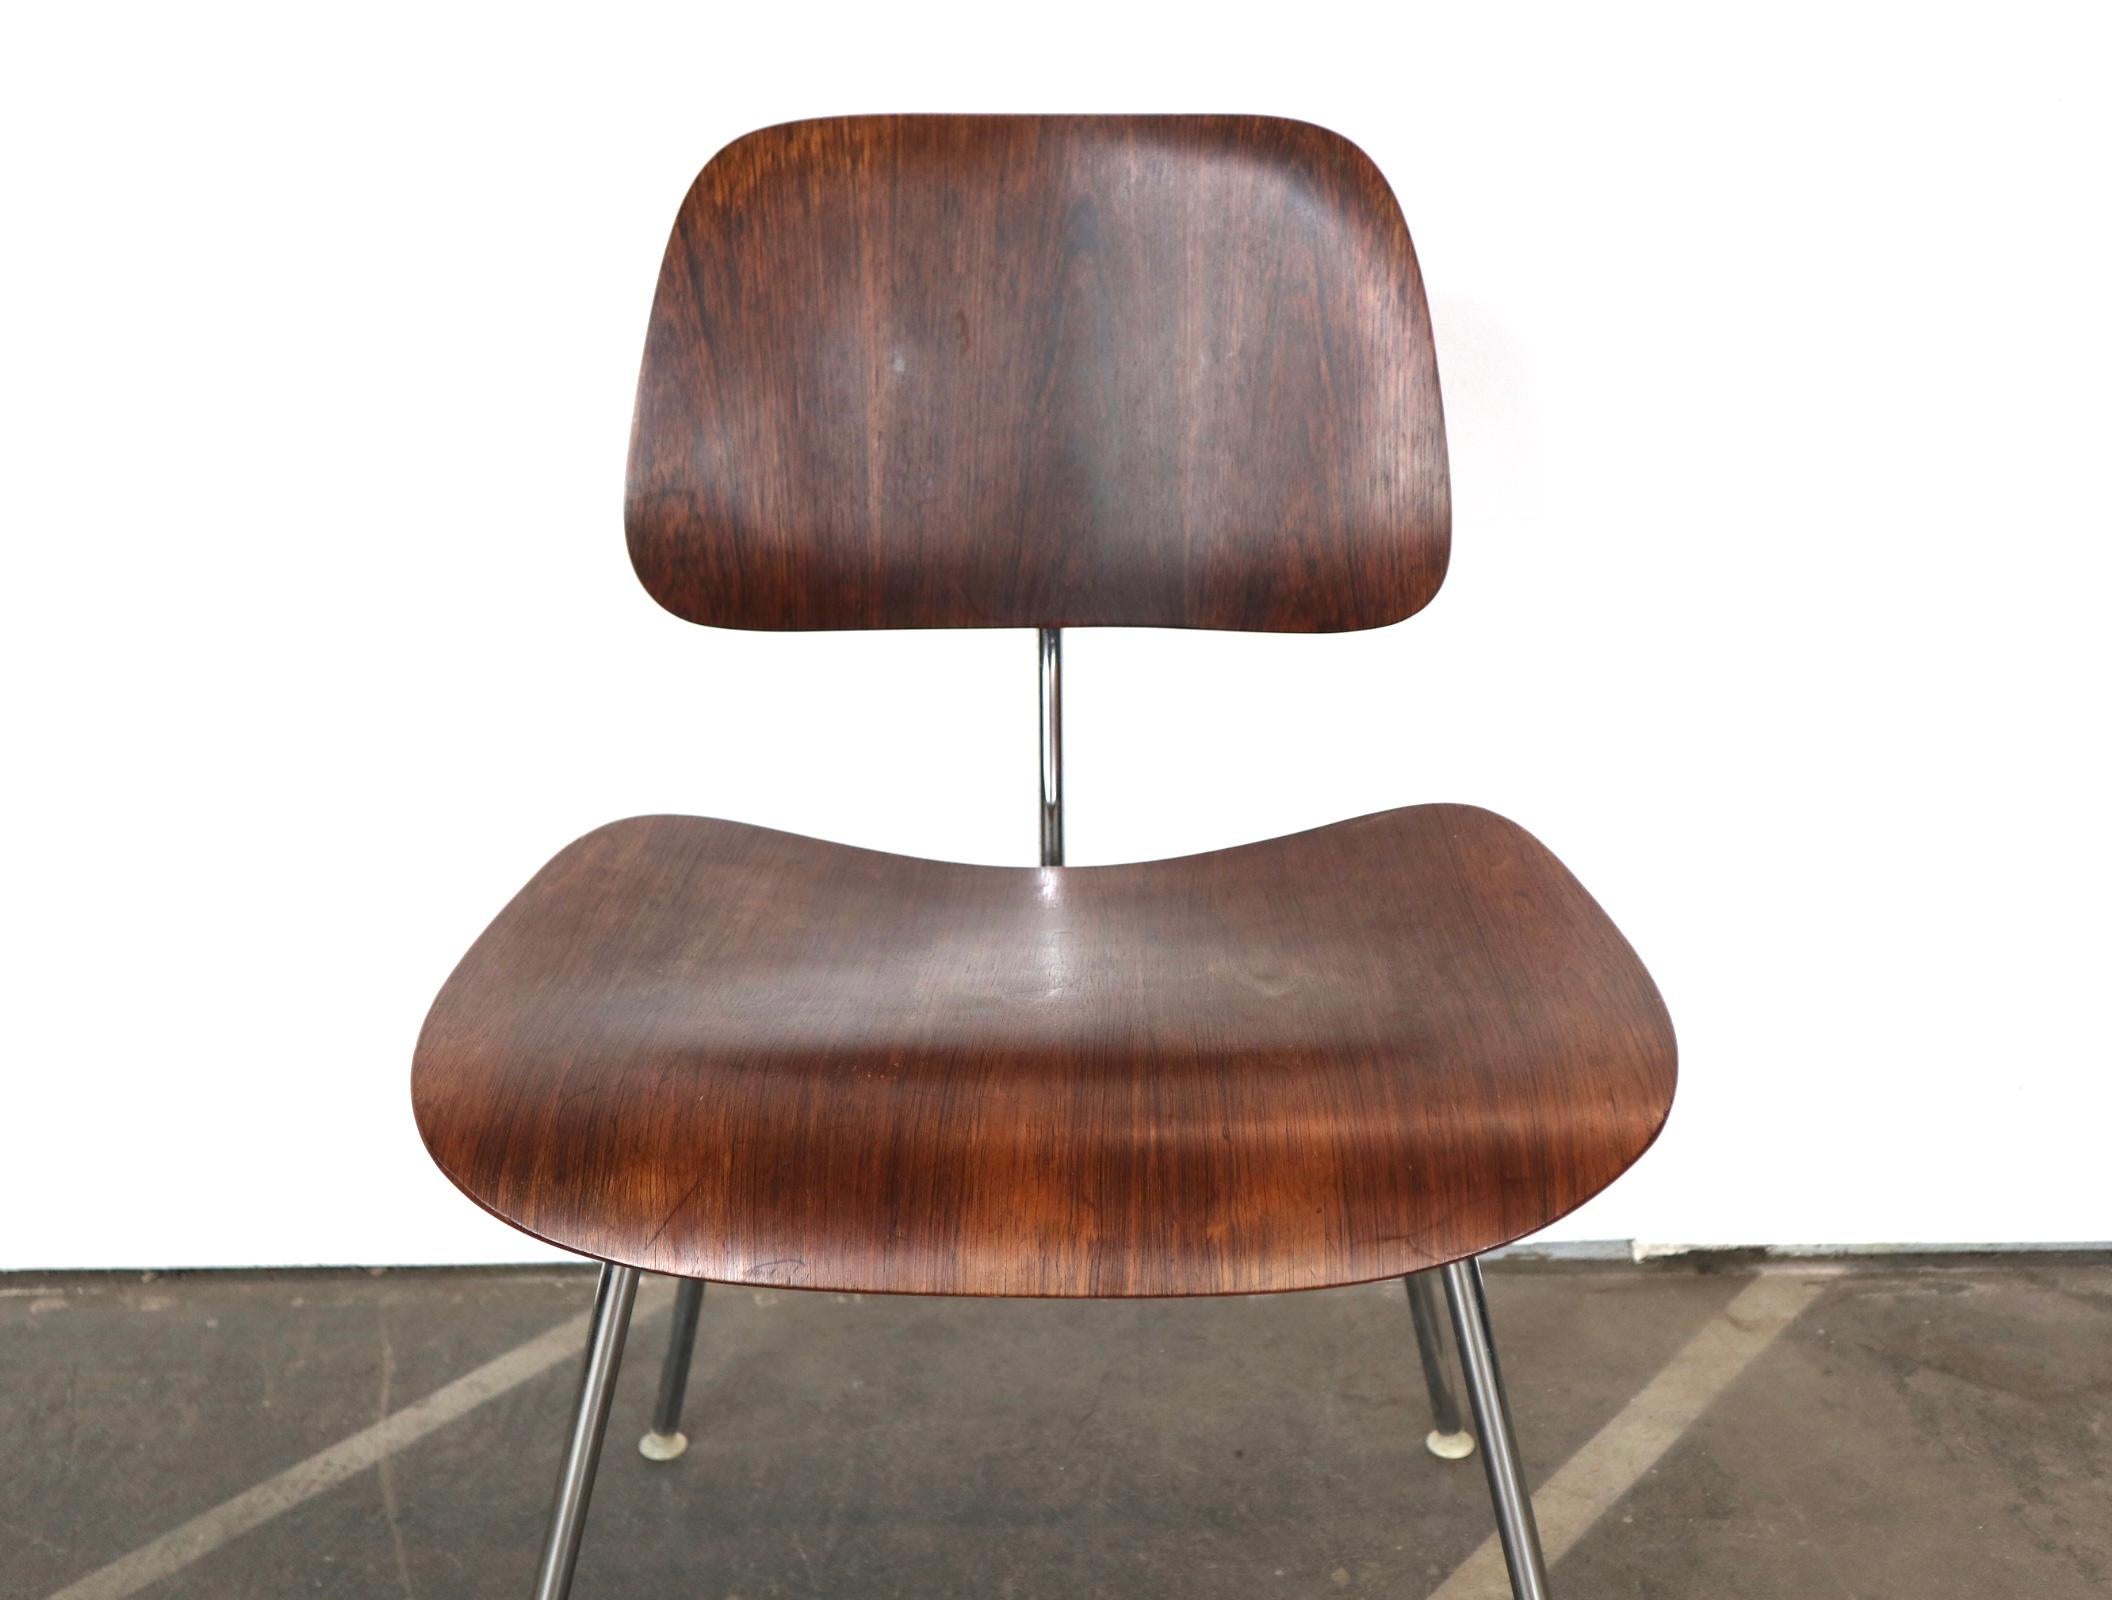 These don’t turn up very often. A rare rosewood DCM chair designed by Charles and Ray Eames for Herman Miller. Rosewood was not a standard finish and was only available by custom special order. The chrome frame and wooden panels are in good vintage